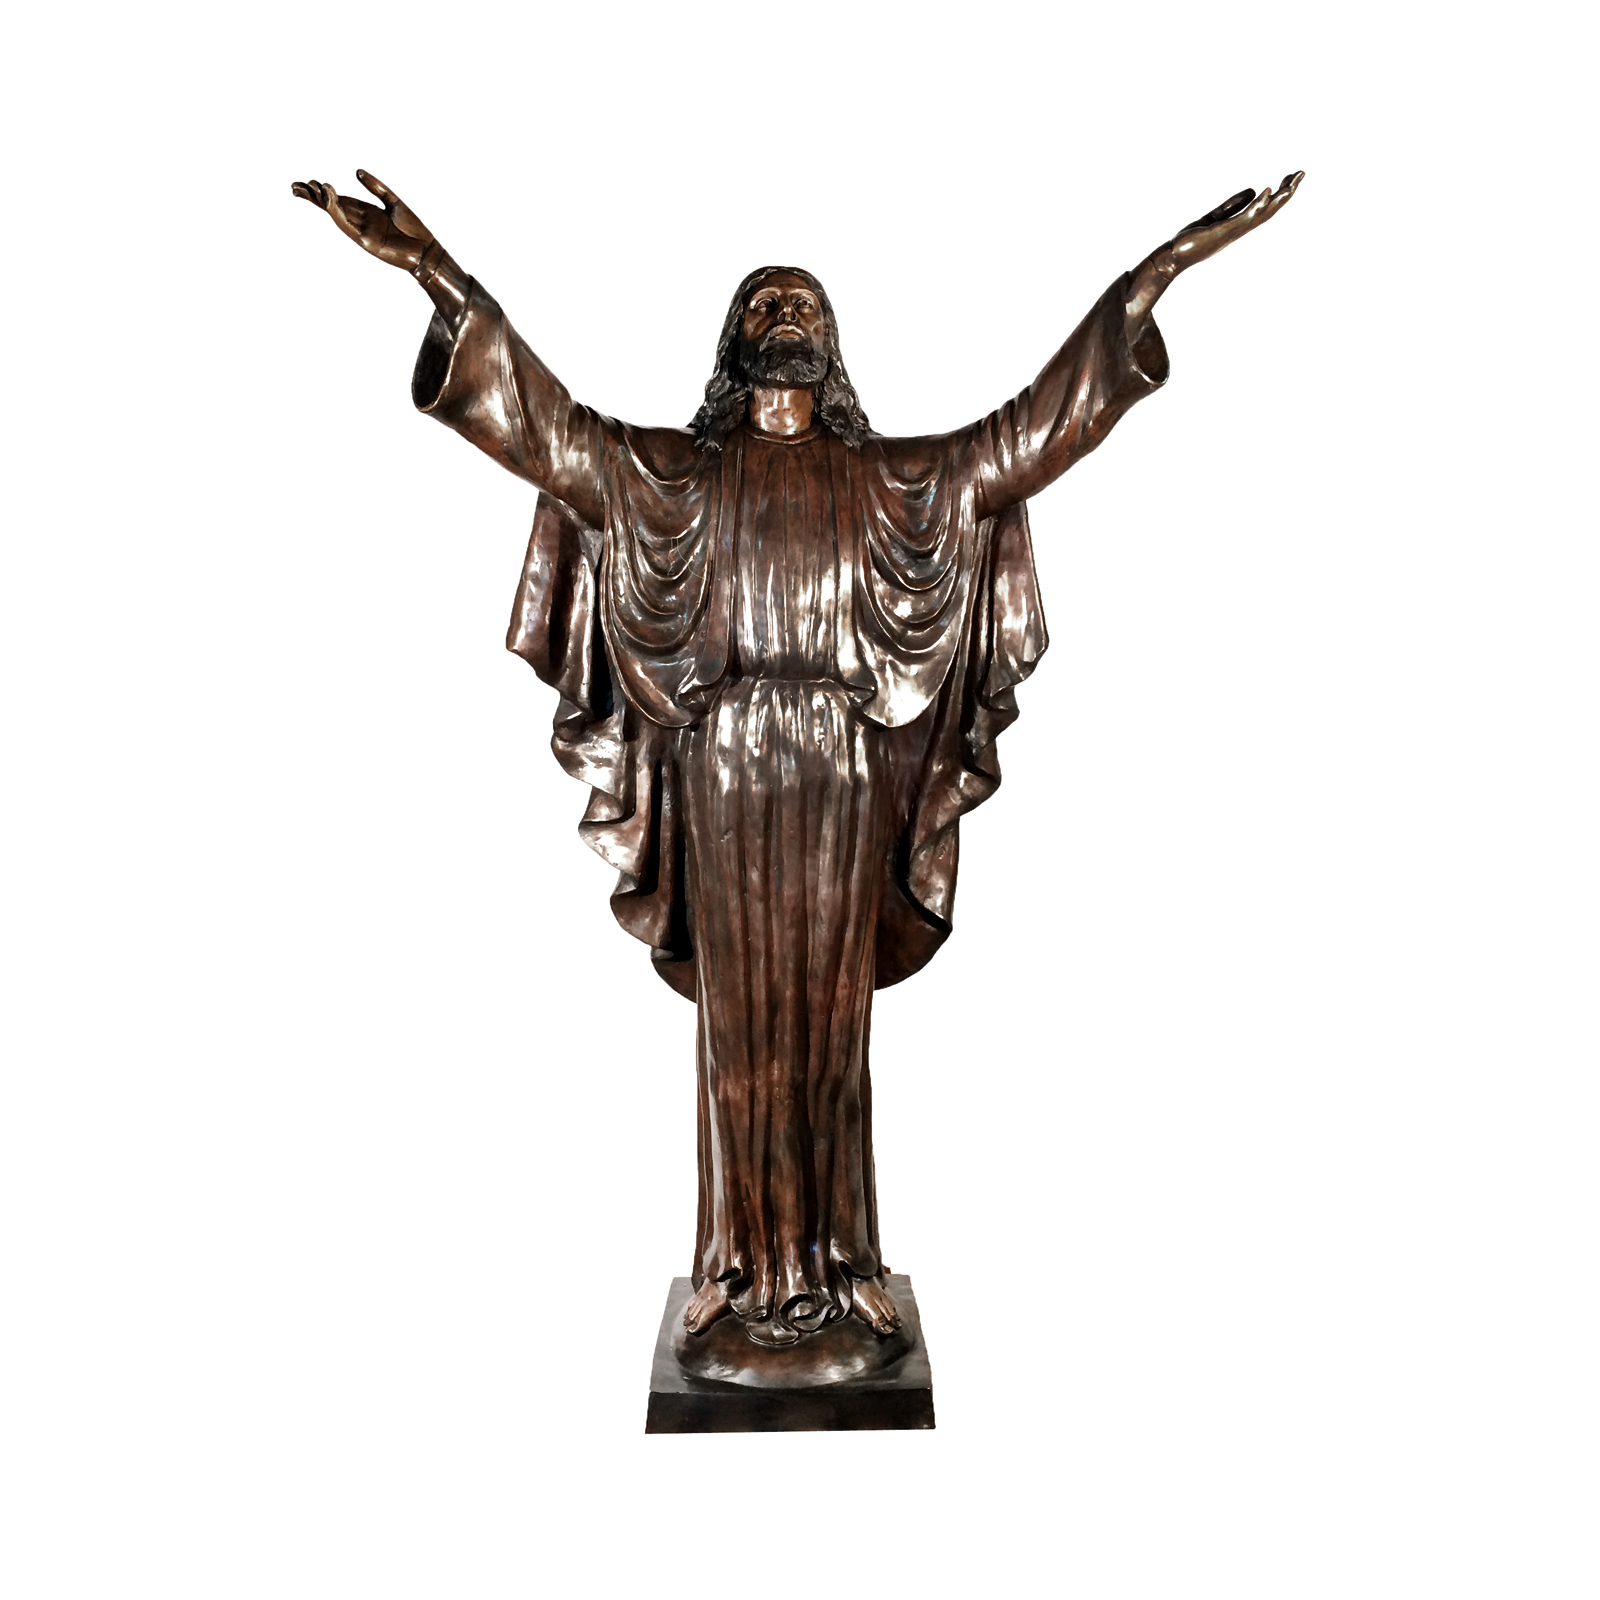 SRB052778 Bronze Life-size Jesus with Arms Open Sculpture by Metropolitan Galleries Inc